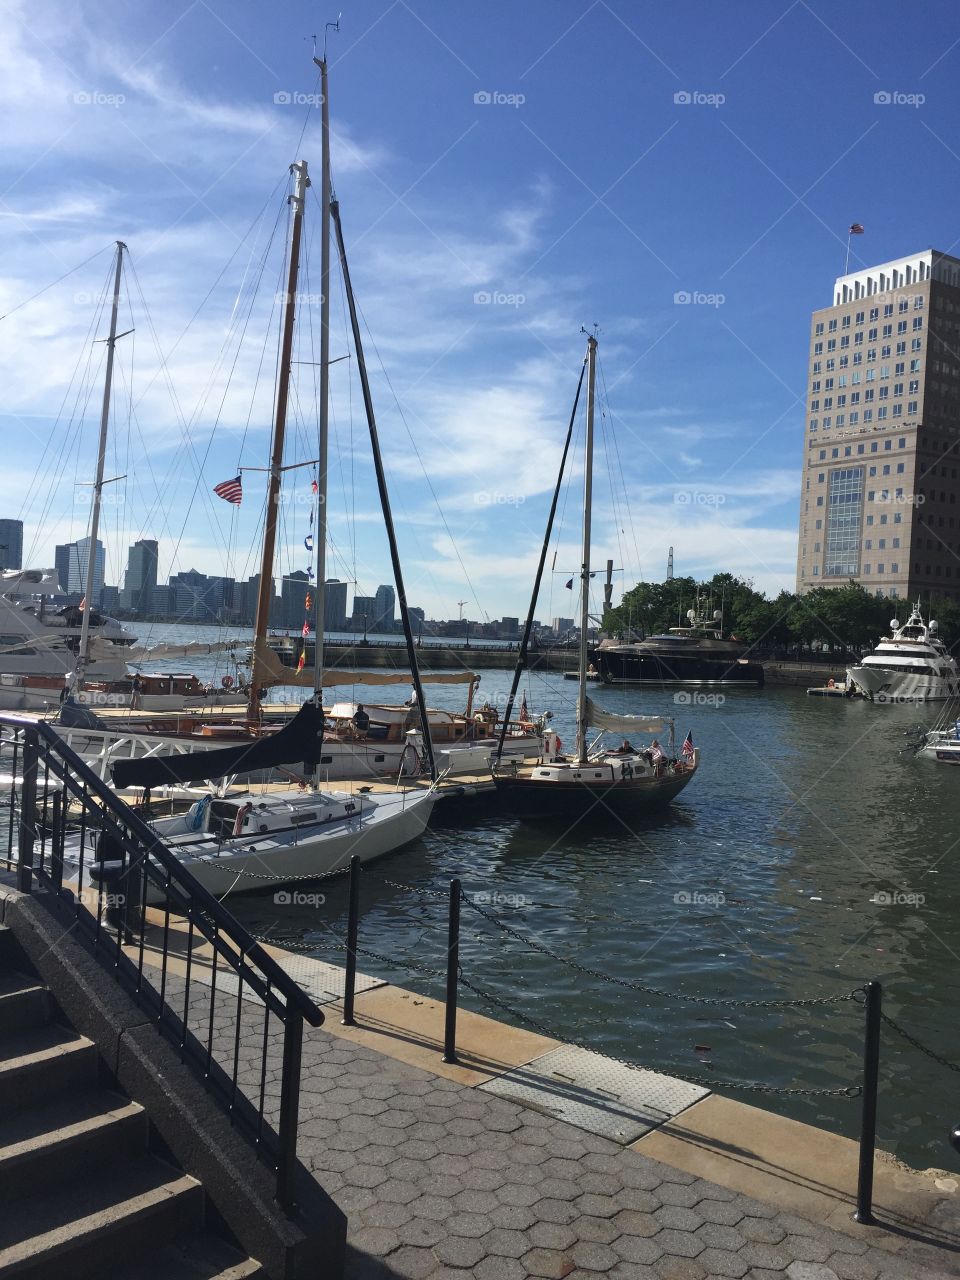 Downtown NYC harbor with small boats and yachts docked for the summer 